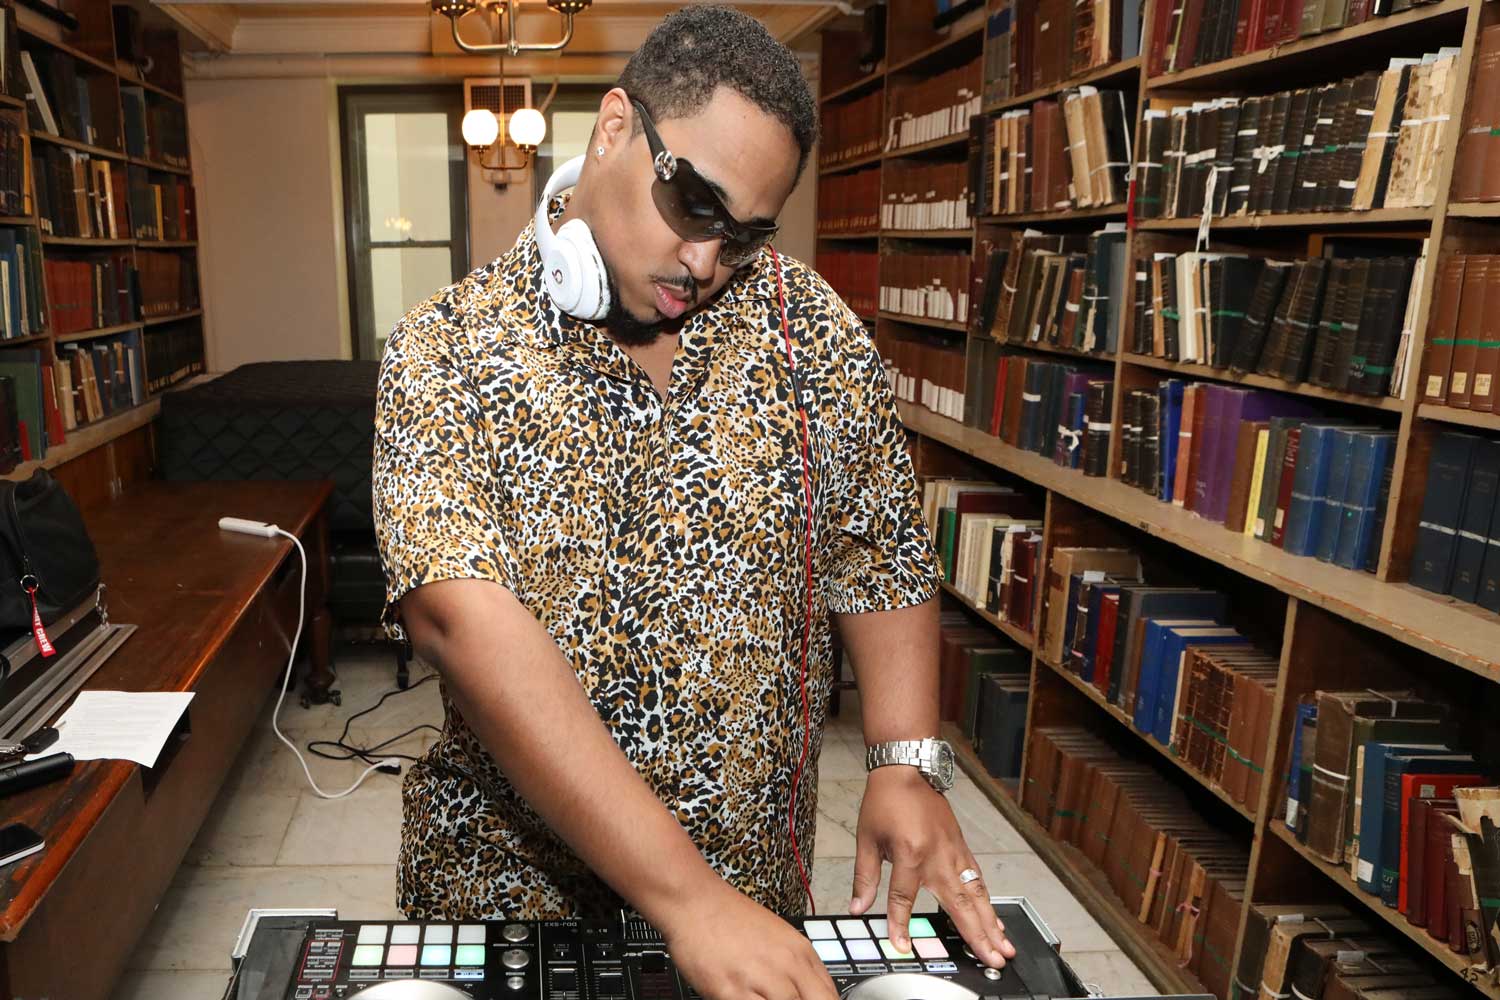 A DJ plays music with books behind them